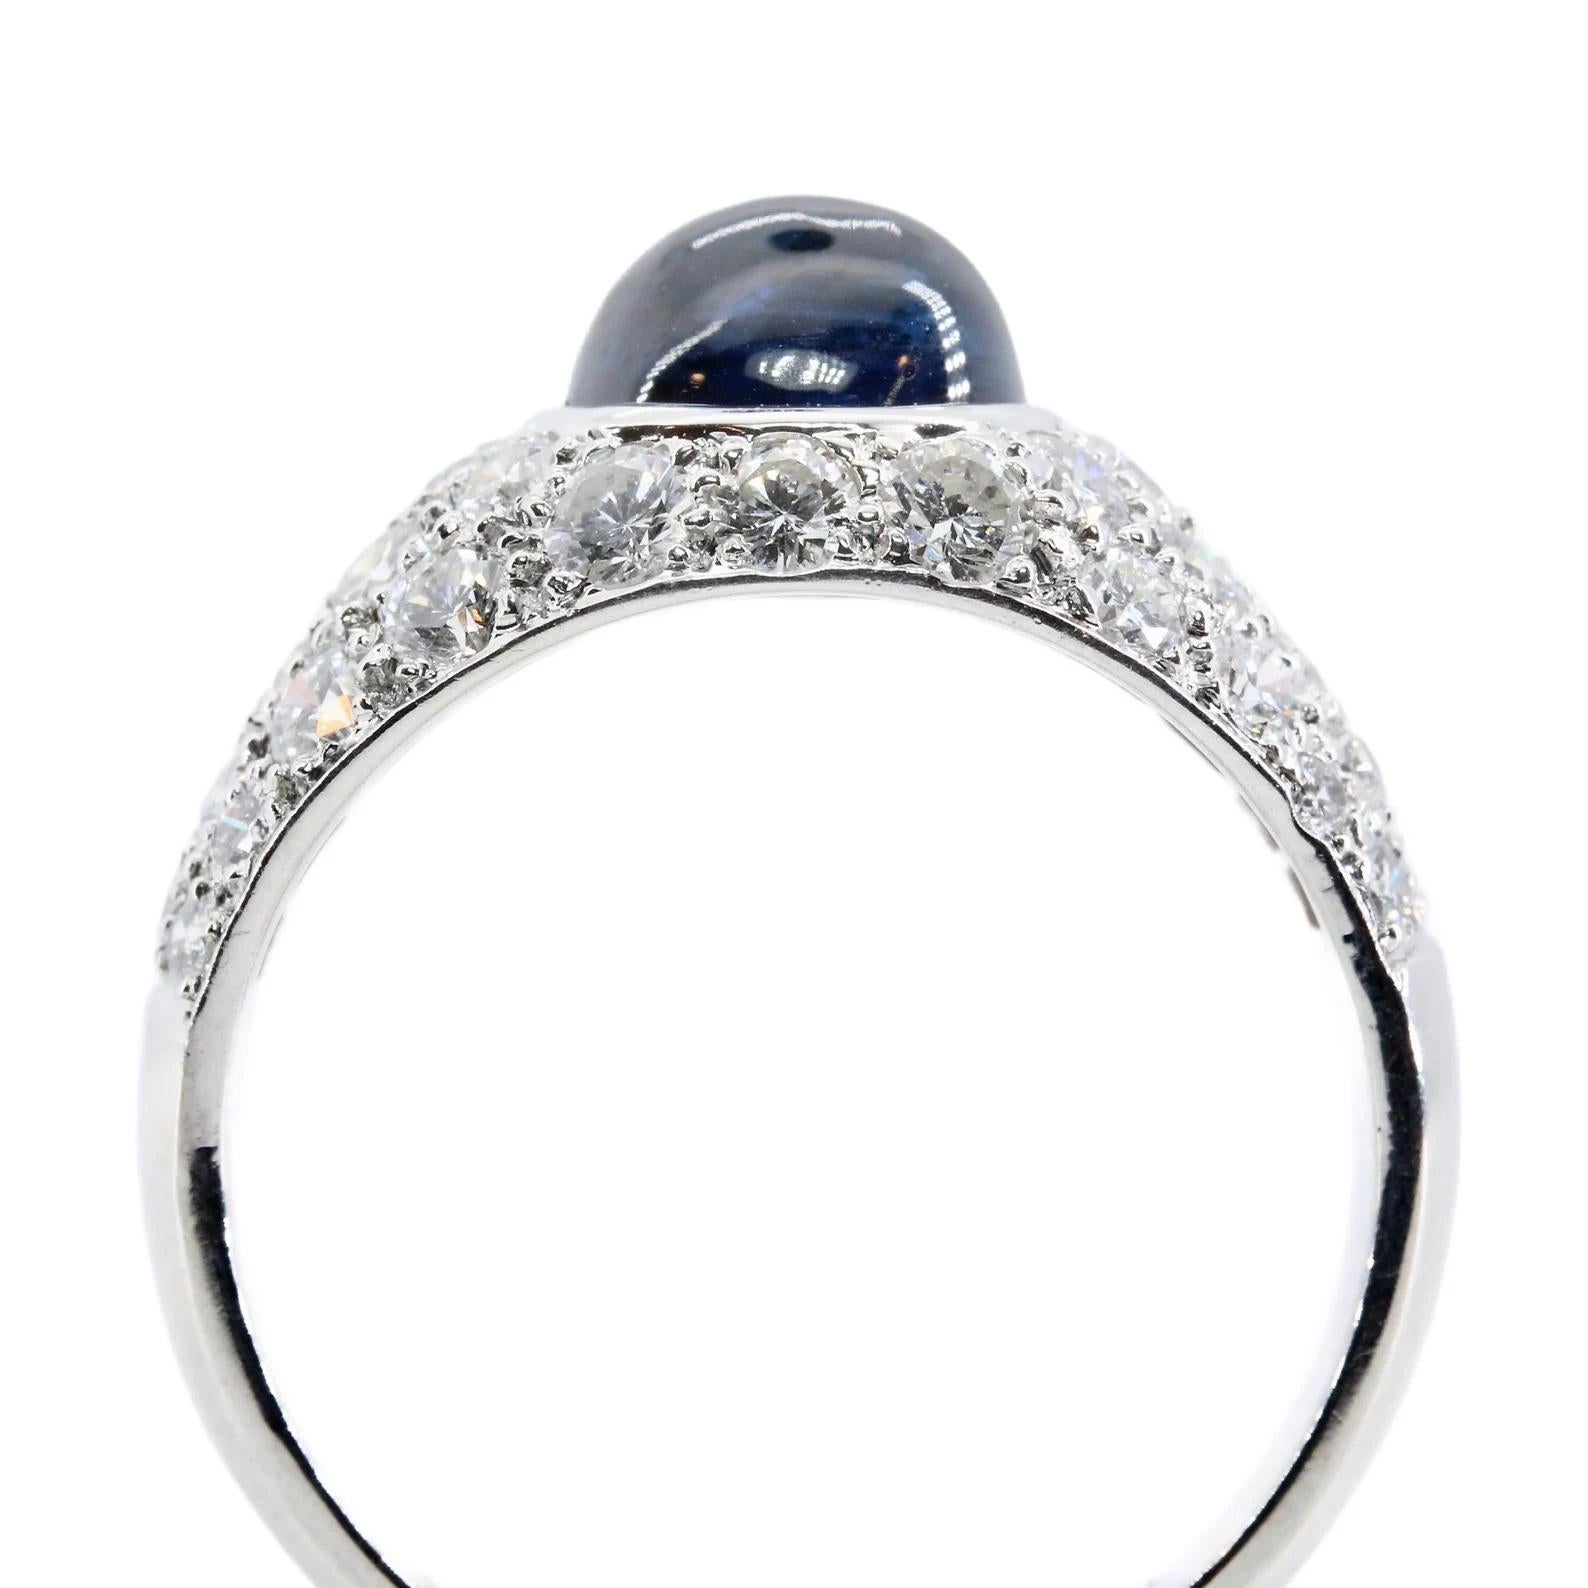 Sumptuous 4.35ctw Sapphire & Diamond Dome Cocktail Ring in Platinum In Good Condition For Sale In Boston, MA